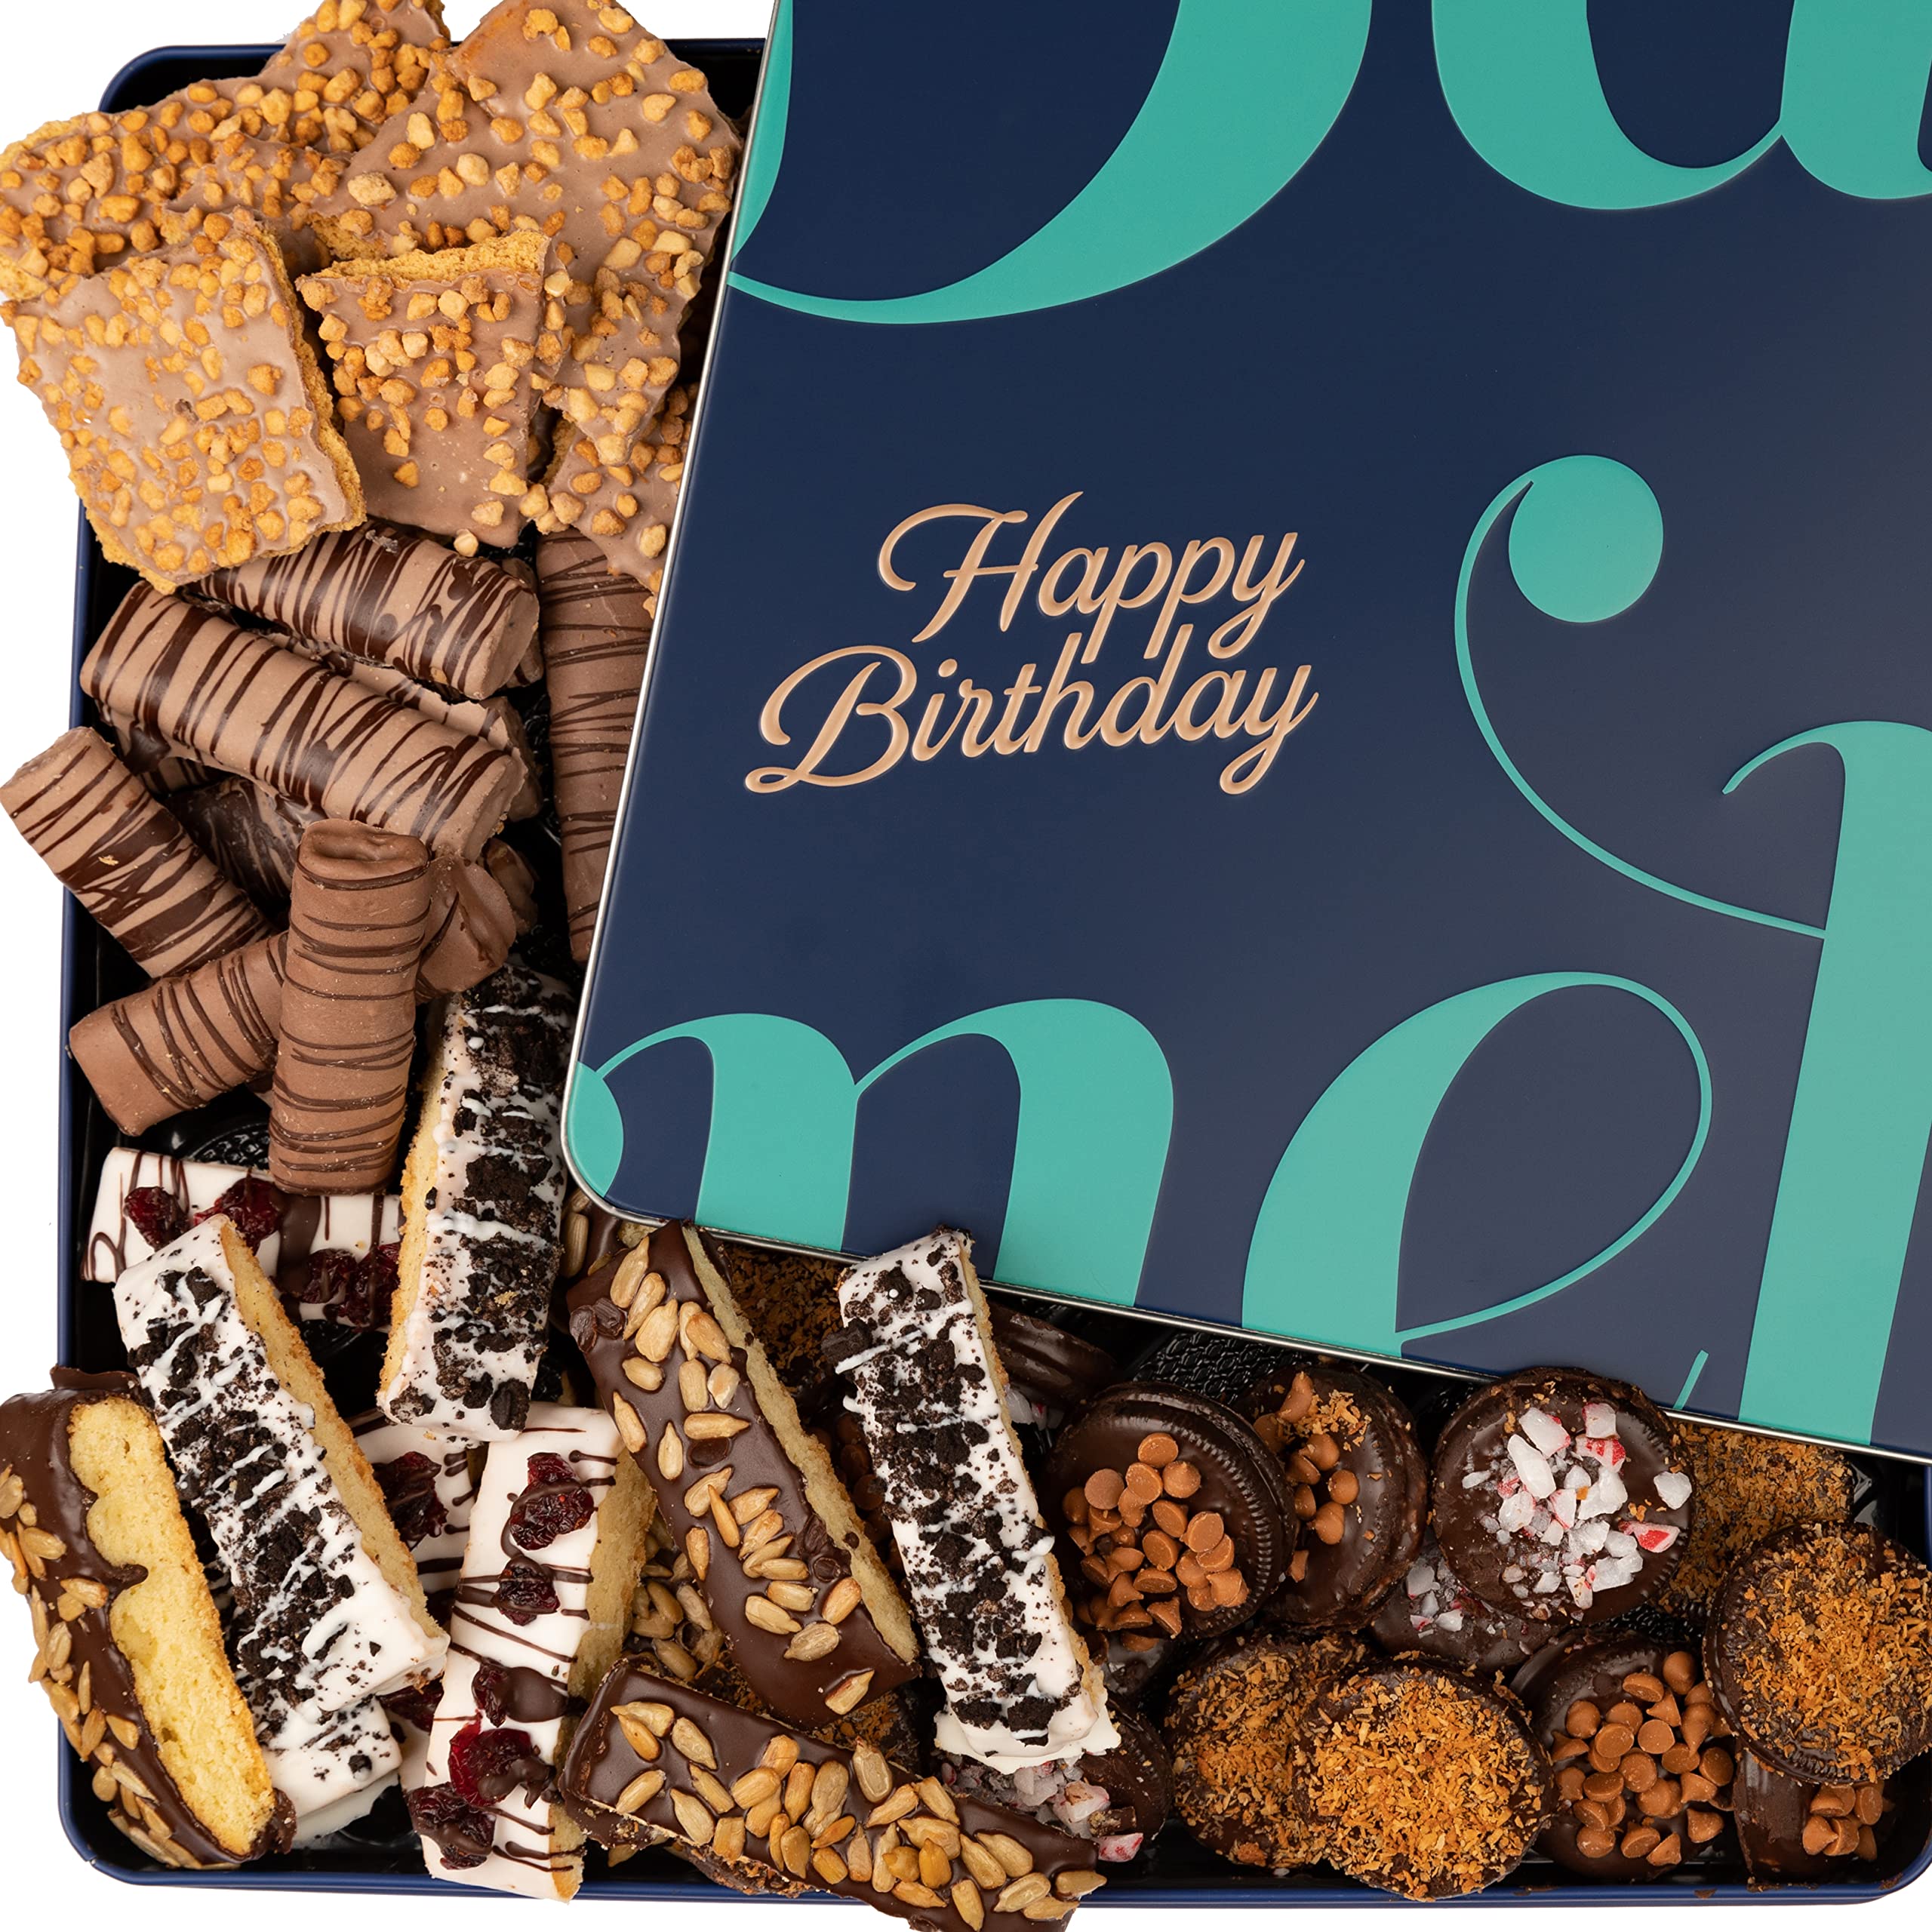 Rise & Shine On Your Birthday: Gourmet Birthday Gift Basket - Gift Baskets  for Delivery